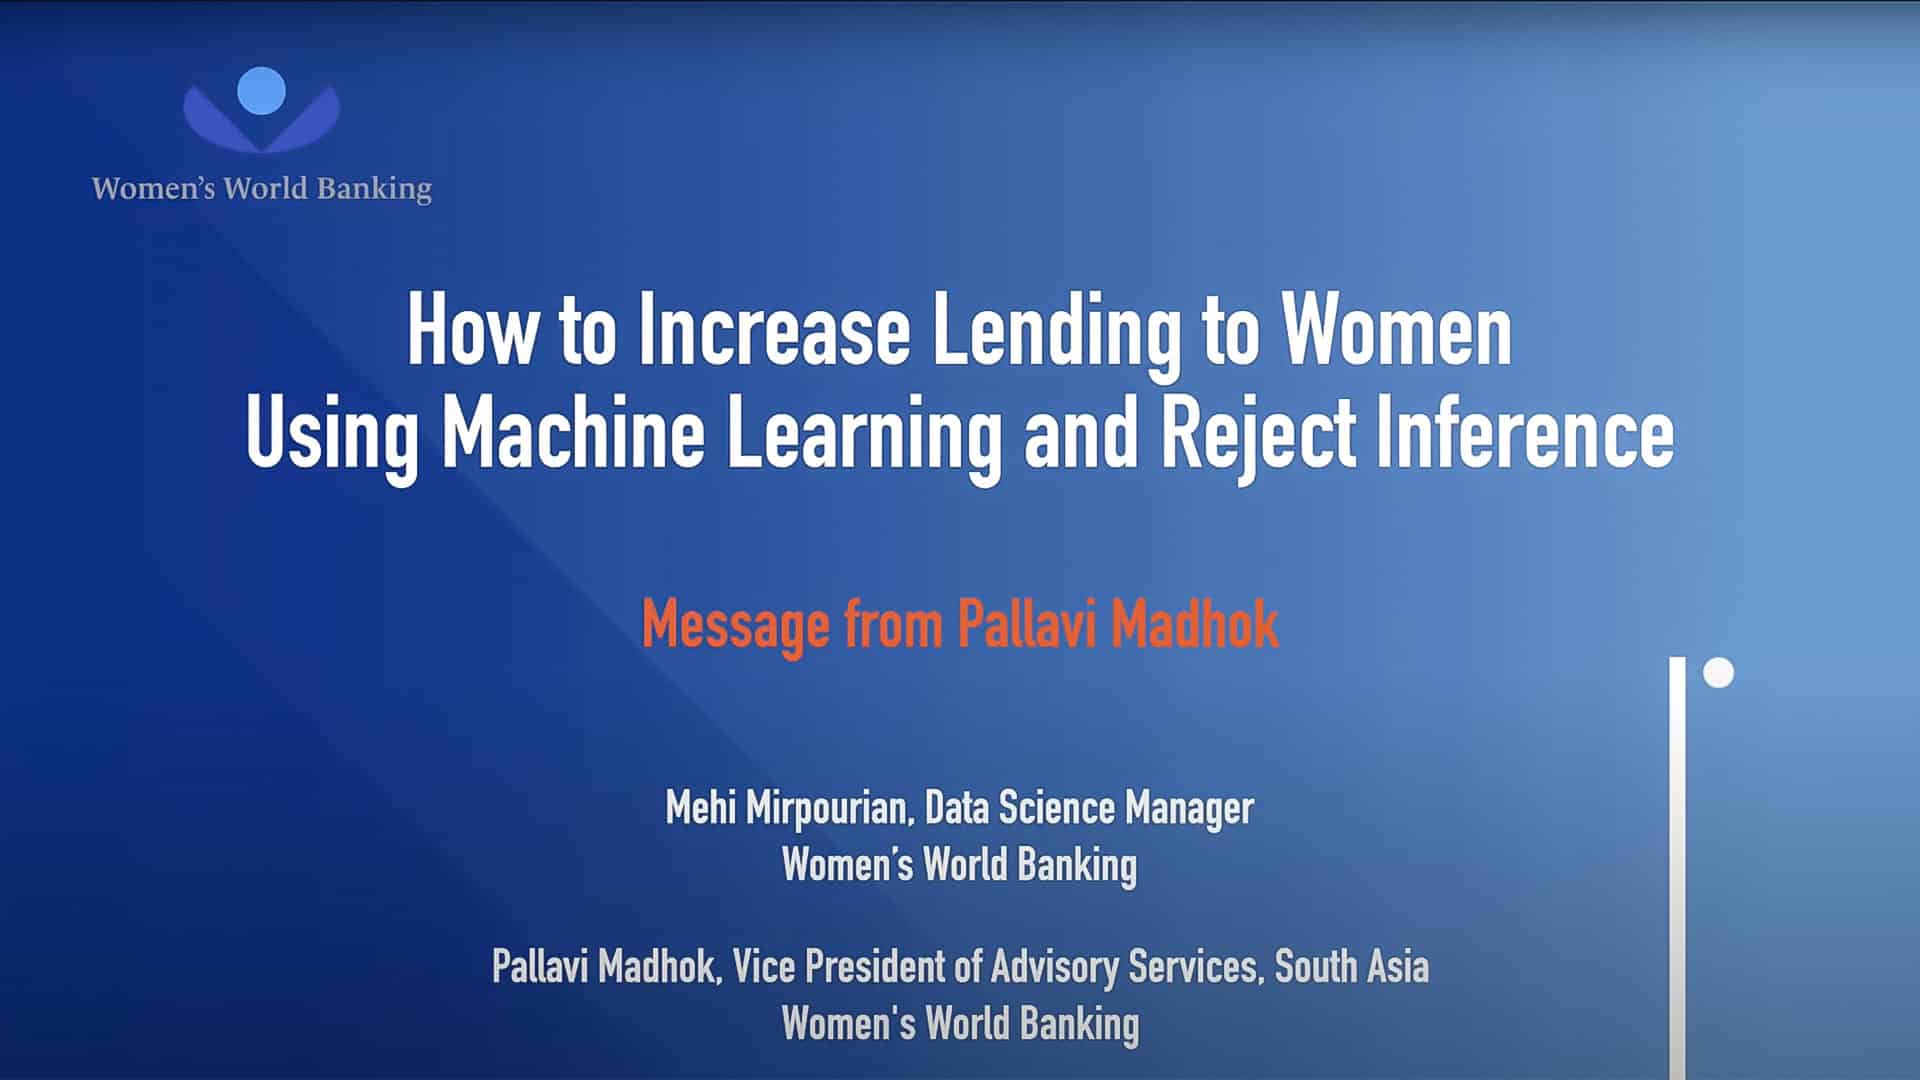 wwb Guest Speaker Message from Pallavi Madhok video thumbnail